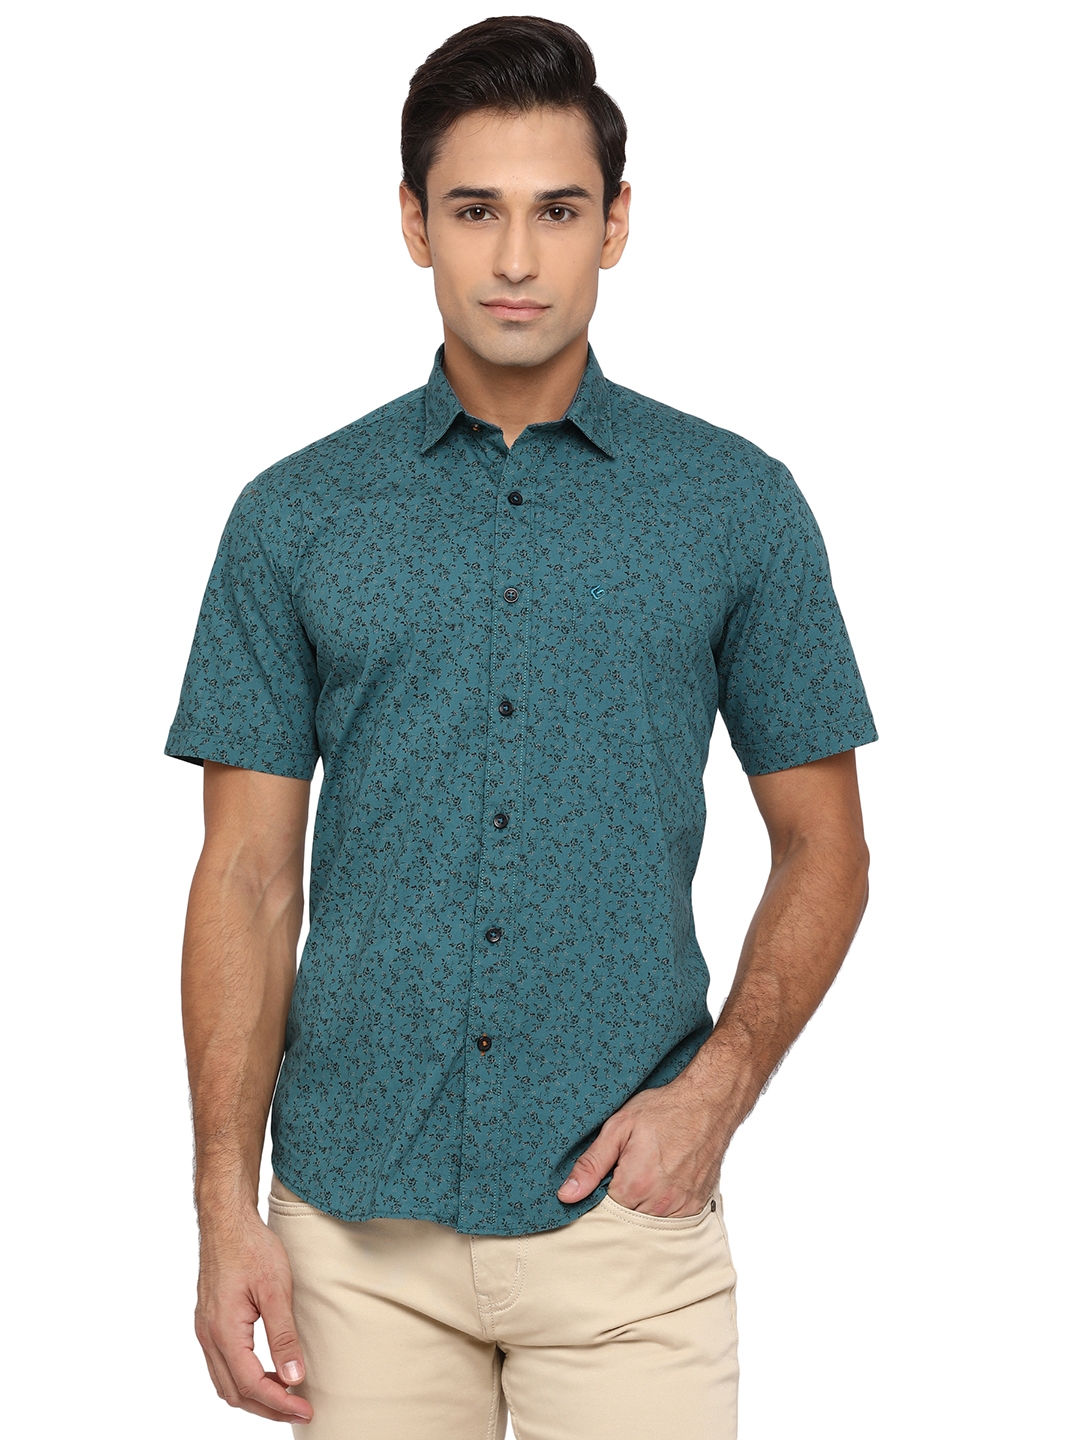 Greenfibre | Pacific Green Printed Smart Fit Casual Shirt | Greenfibre